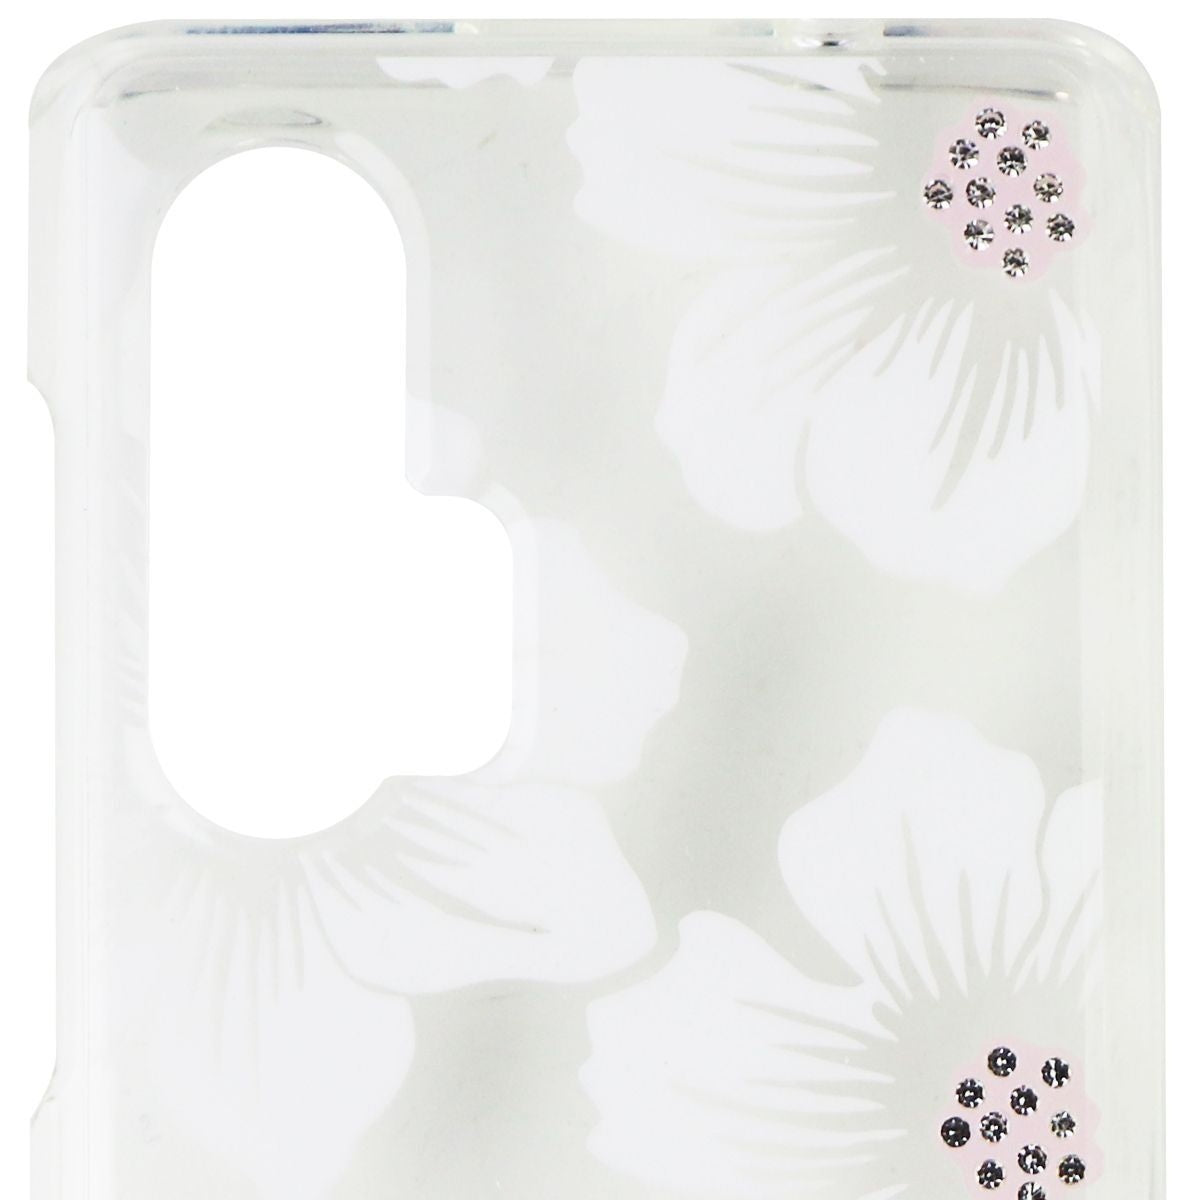 Kate Spade Hard Case for Motorola Edge+ (2020) - Hollyhock Floral Clear/Cream Cell Phone - Cases, Covers & Skins Kate Spade    - Simple Cell Bulk Wholesale Pricing - USA Seller